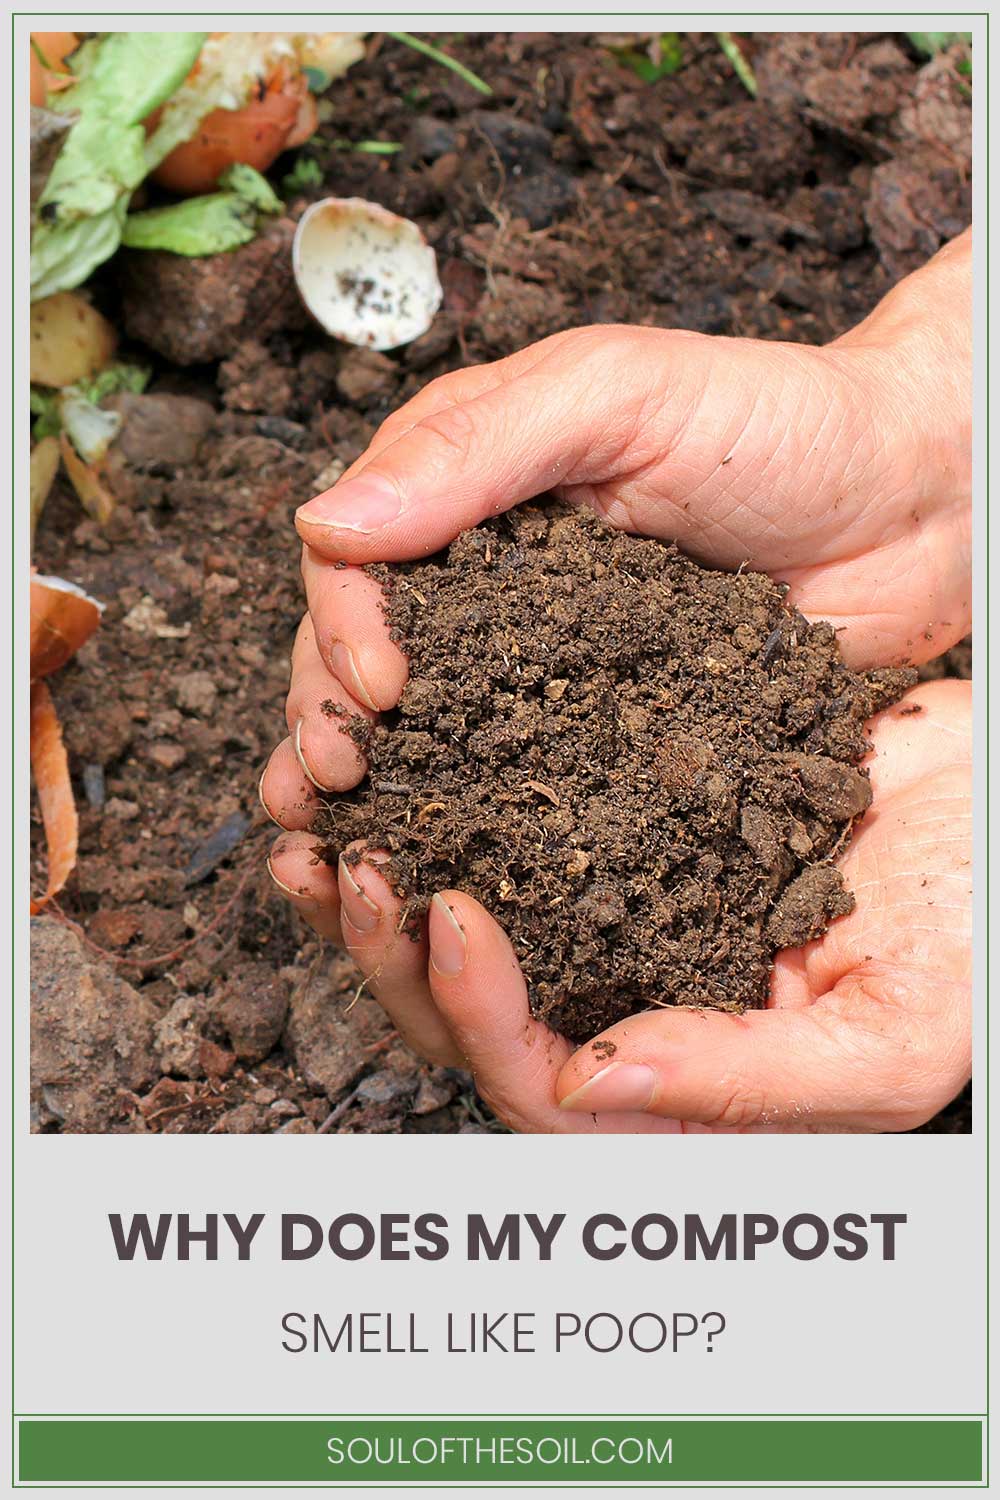 A man holding a handful of compost from the pile of it - Why does it smell like poop?